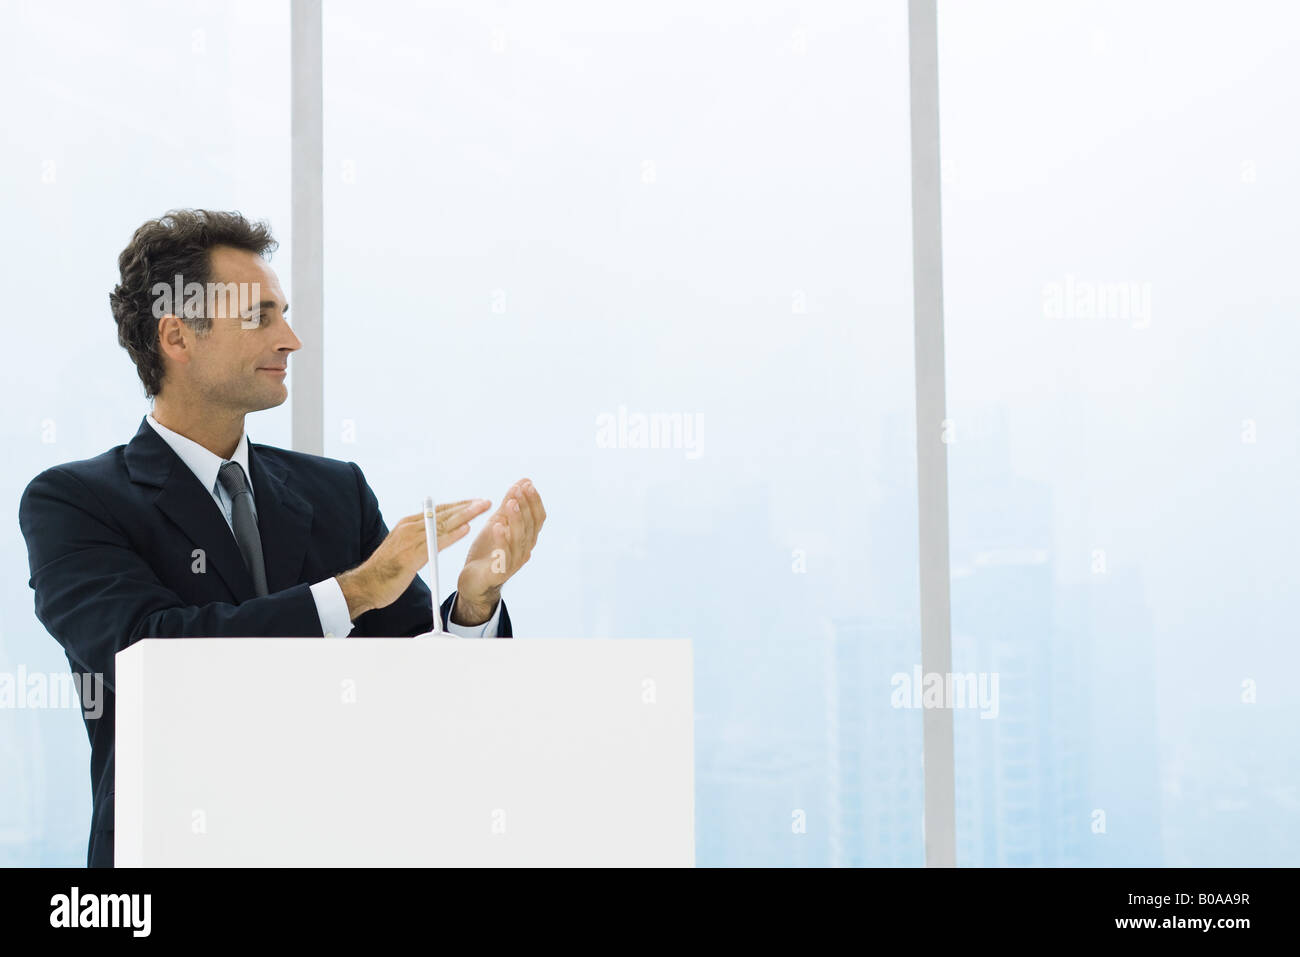 Businessman at lectern clapping hands, looking away, smiling Stock Photo